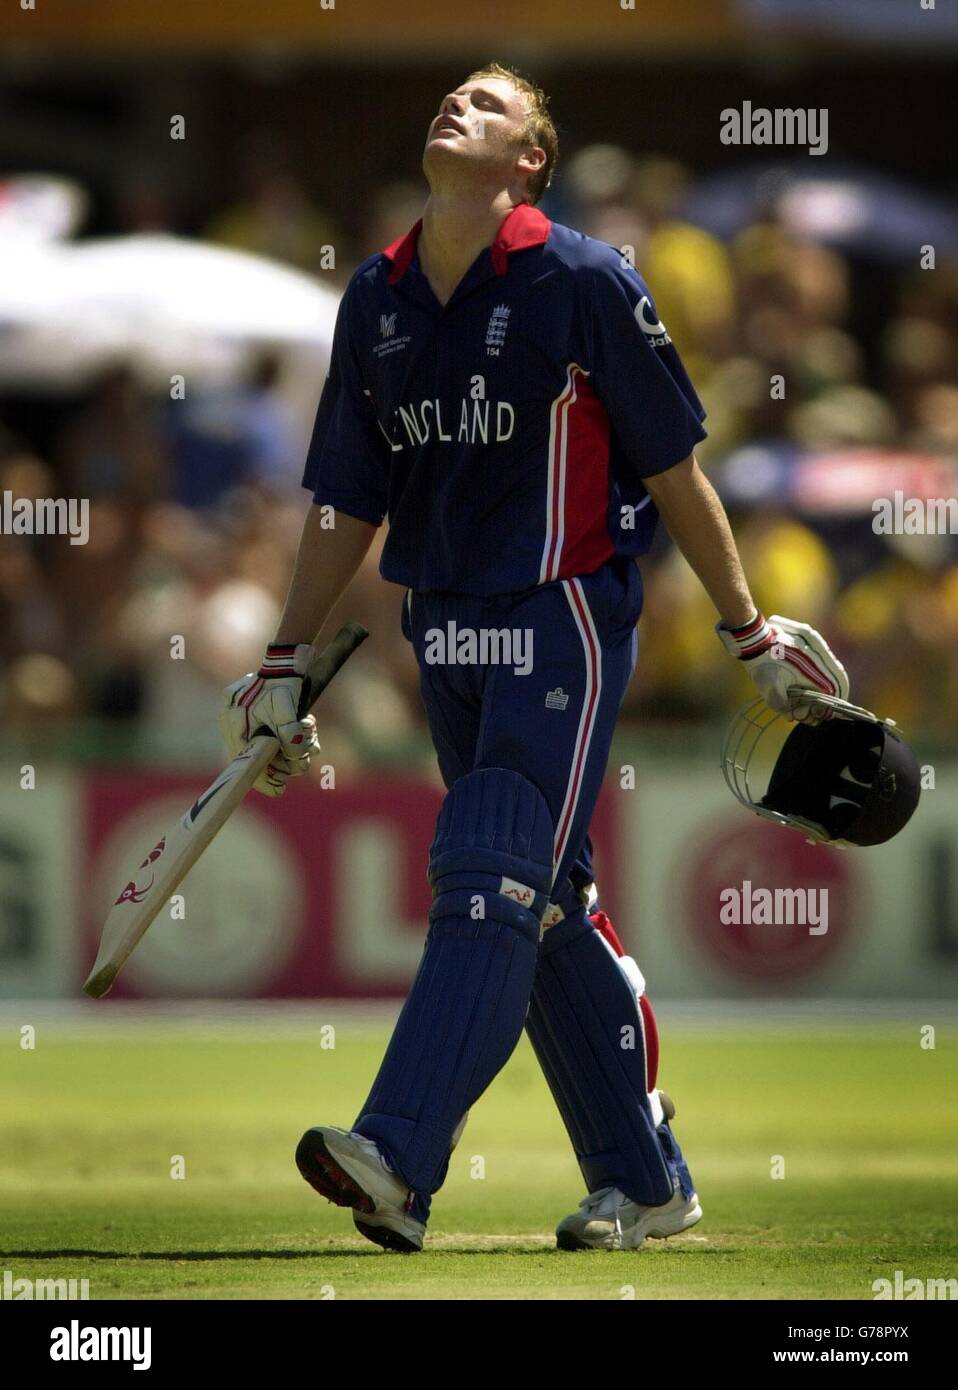 England's Andrew Flintoff leaves the field after being caught by Australia's Adam Gilchrist off the bowling of Andy Bichel for 45 runs during their final Group A Cricket World Cup match at St George's Park, Port Elizabeth. England won the toss and elected to bat first. Stock Photo